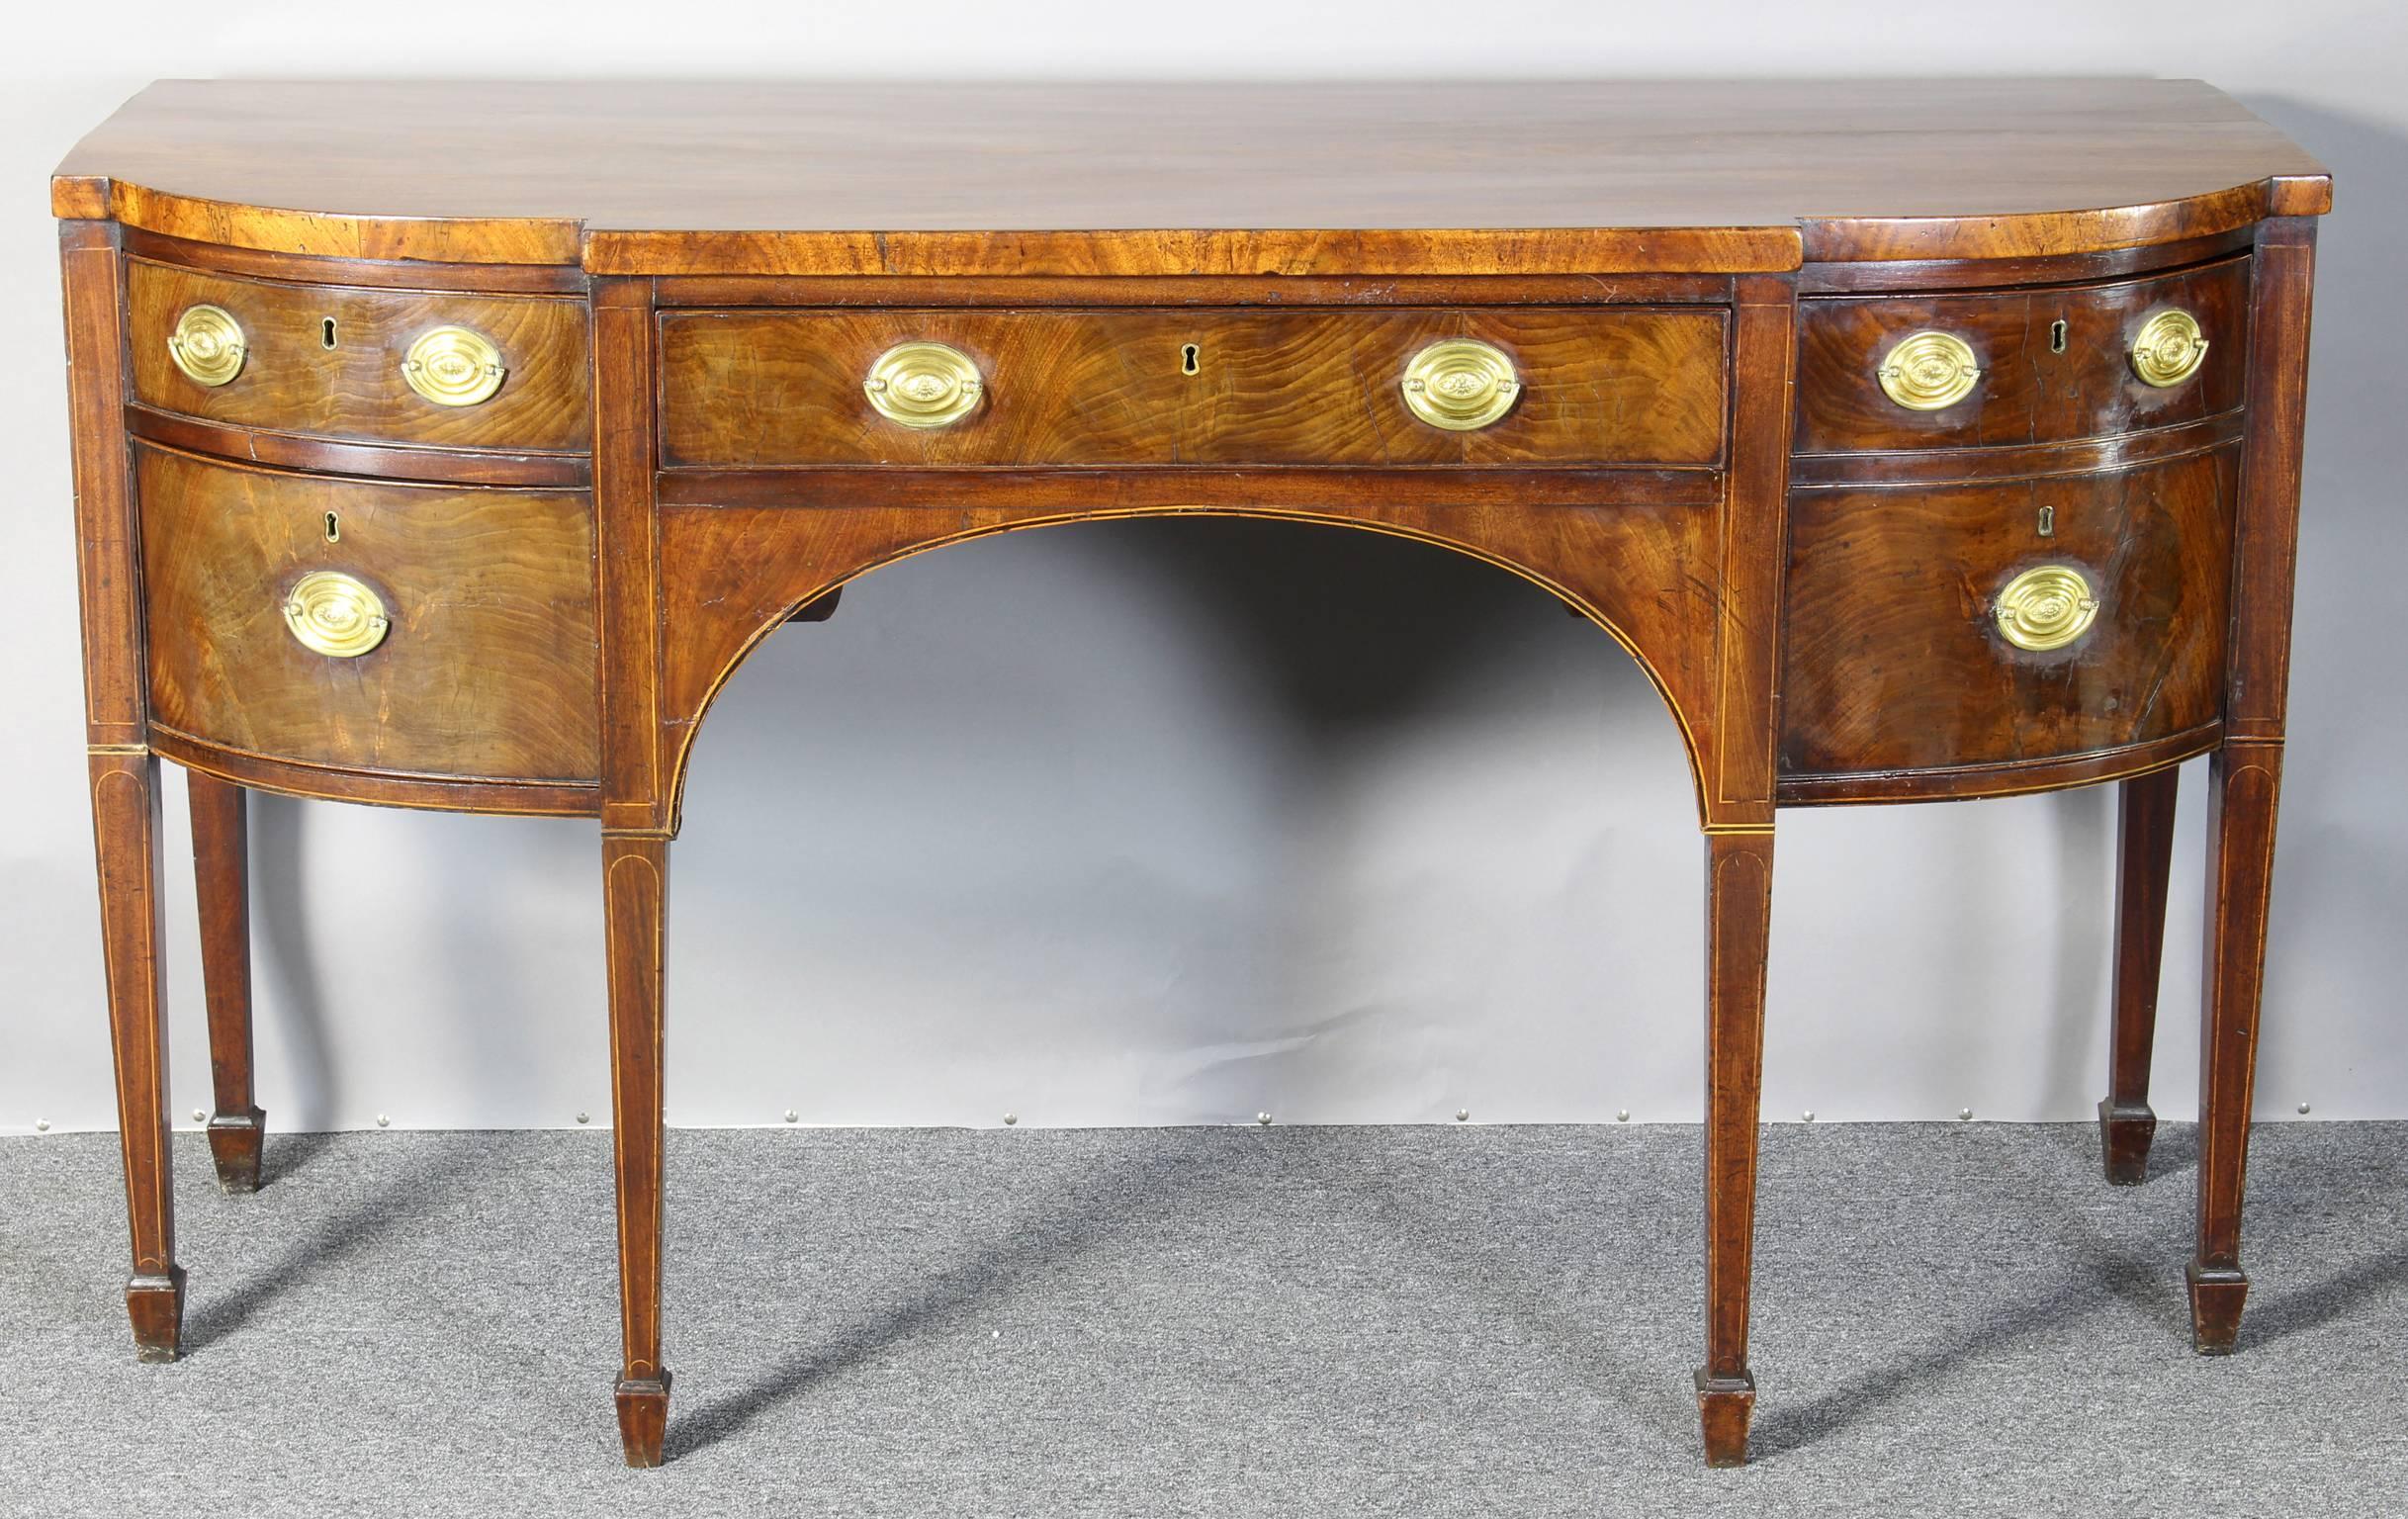 An elegant late 18th century George III mahogany sideboard, of semi-bowed form with boxwood and ebony stringing above a central drawer, an arched apron, twin false drawer front on the side with fitted cellar interior and two corresponding short